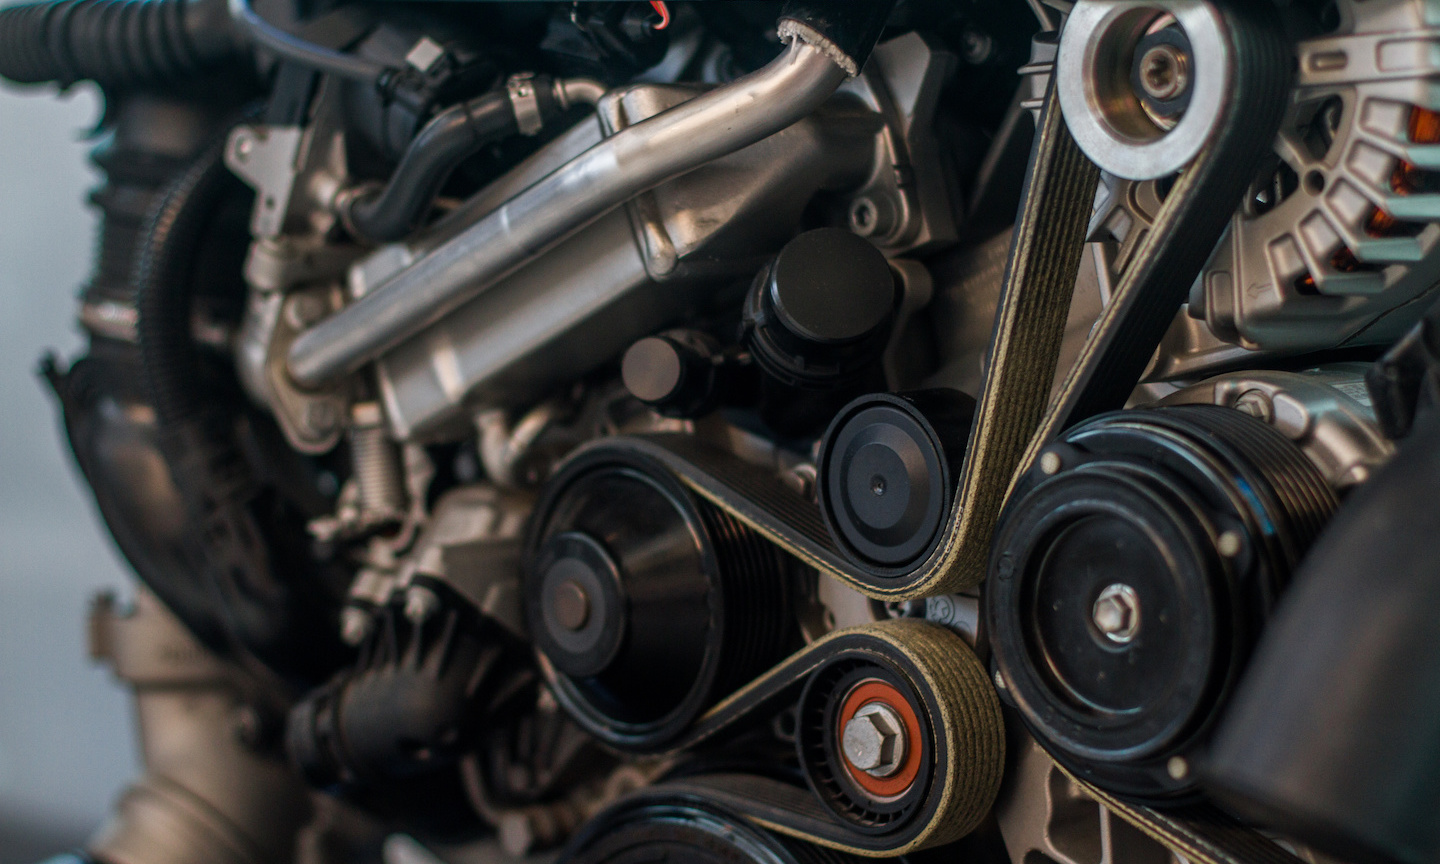 Serpentine Belt Came Off But Not Broken: Causes and Fixes